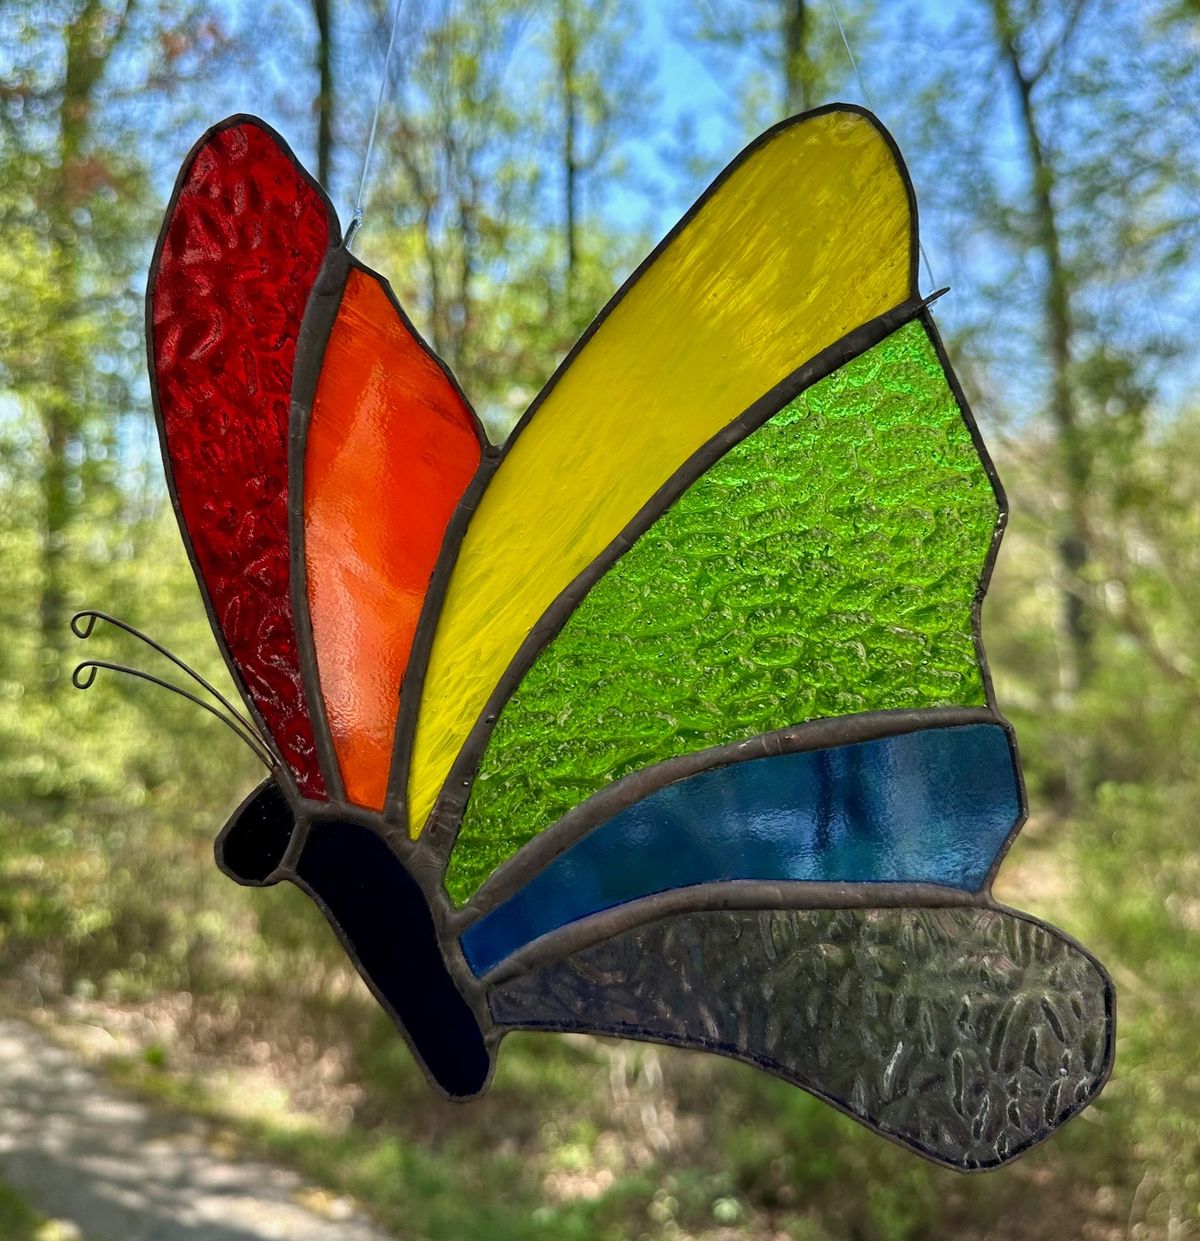 June 19 Pride Heart or Butterfly at Lost Ark Distilling Company